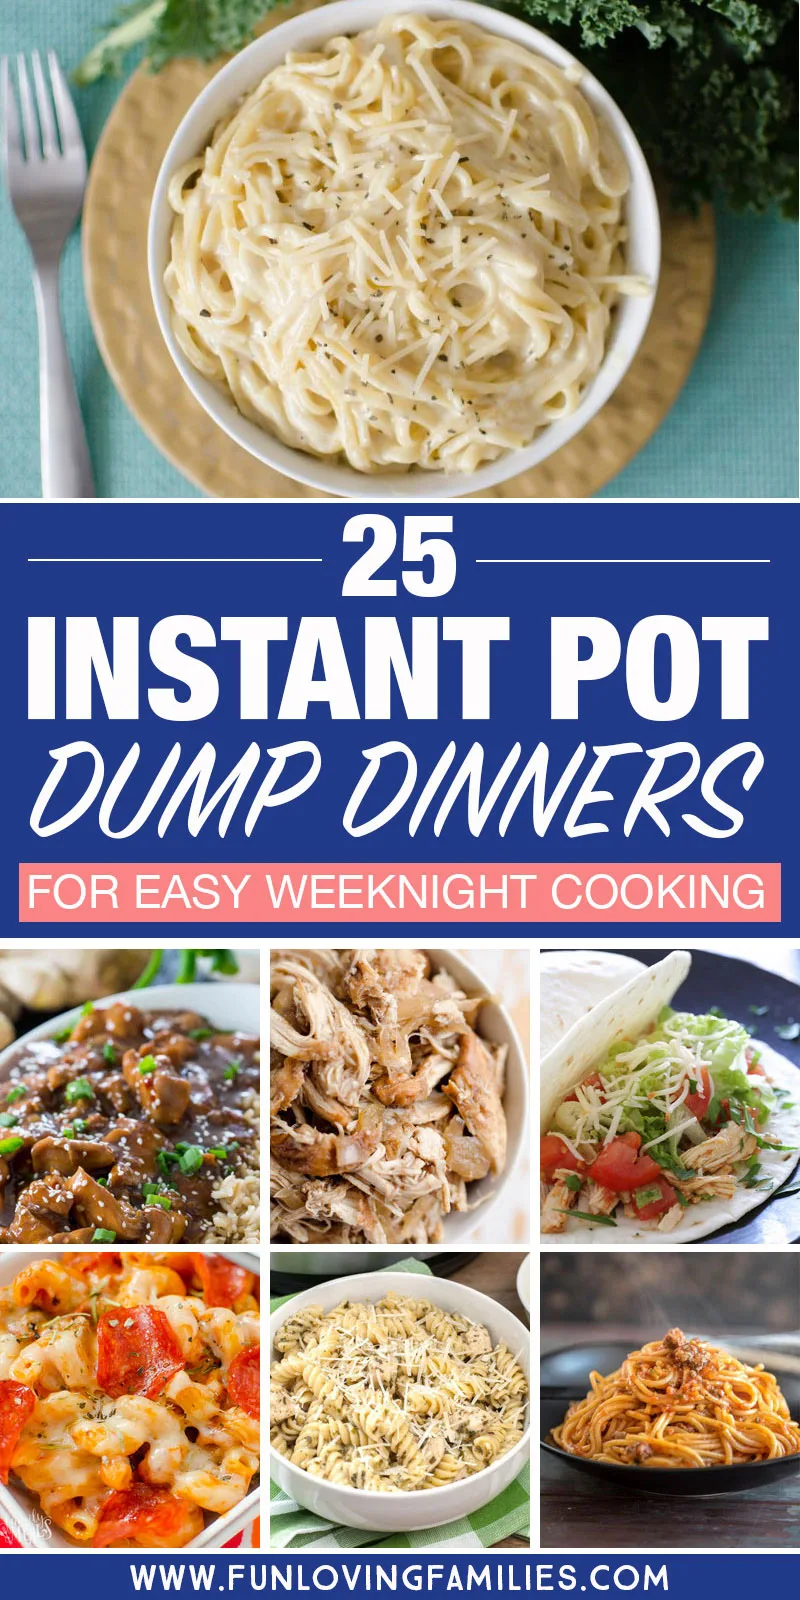 25 instant pot dump dinners for easy weeknight cooking